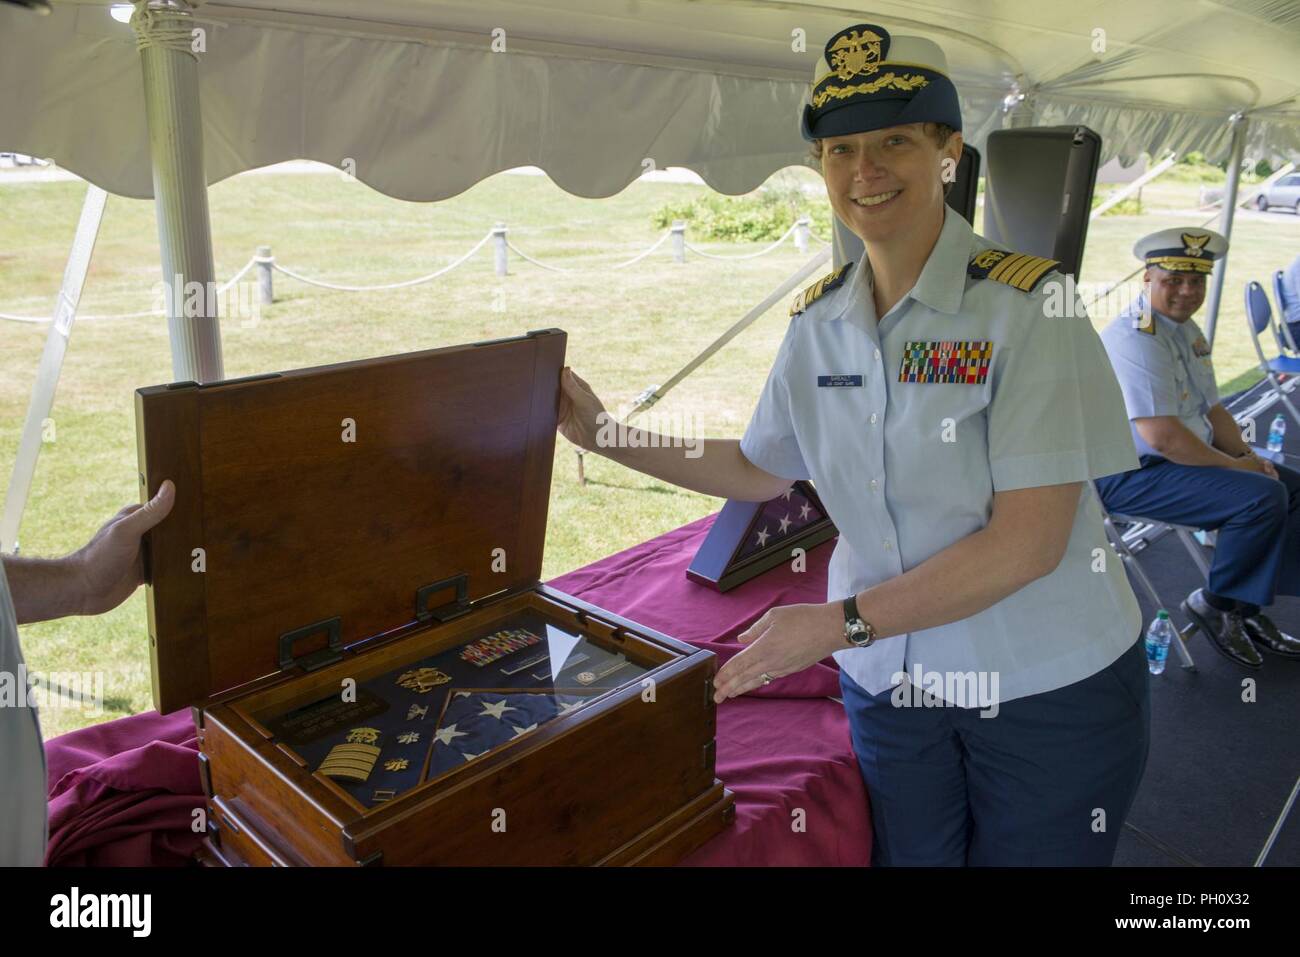 Captain Kristen S. Sareault, USPHS, retires from active duty at USCG Station Cape Cod Canal, Mass. on June 22, 2018. Stock Photo